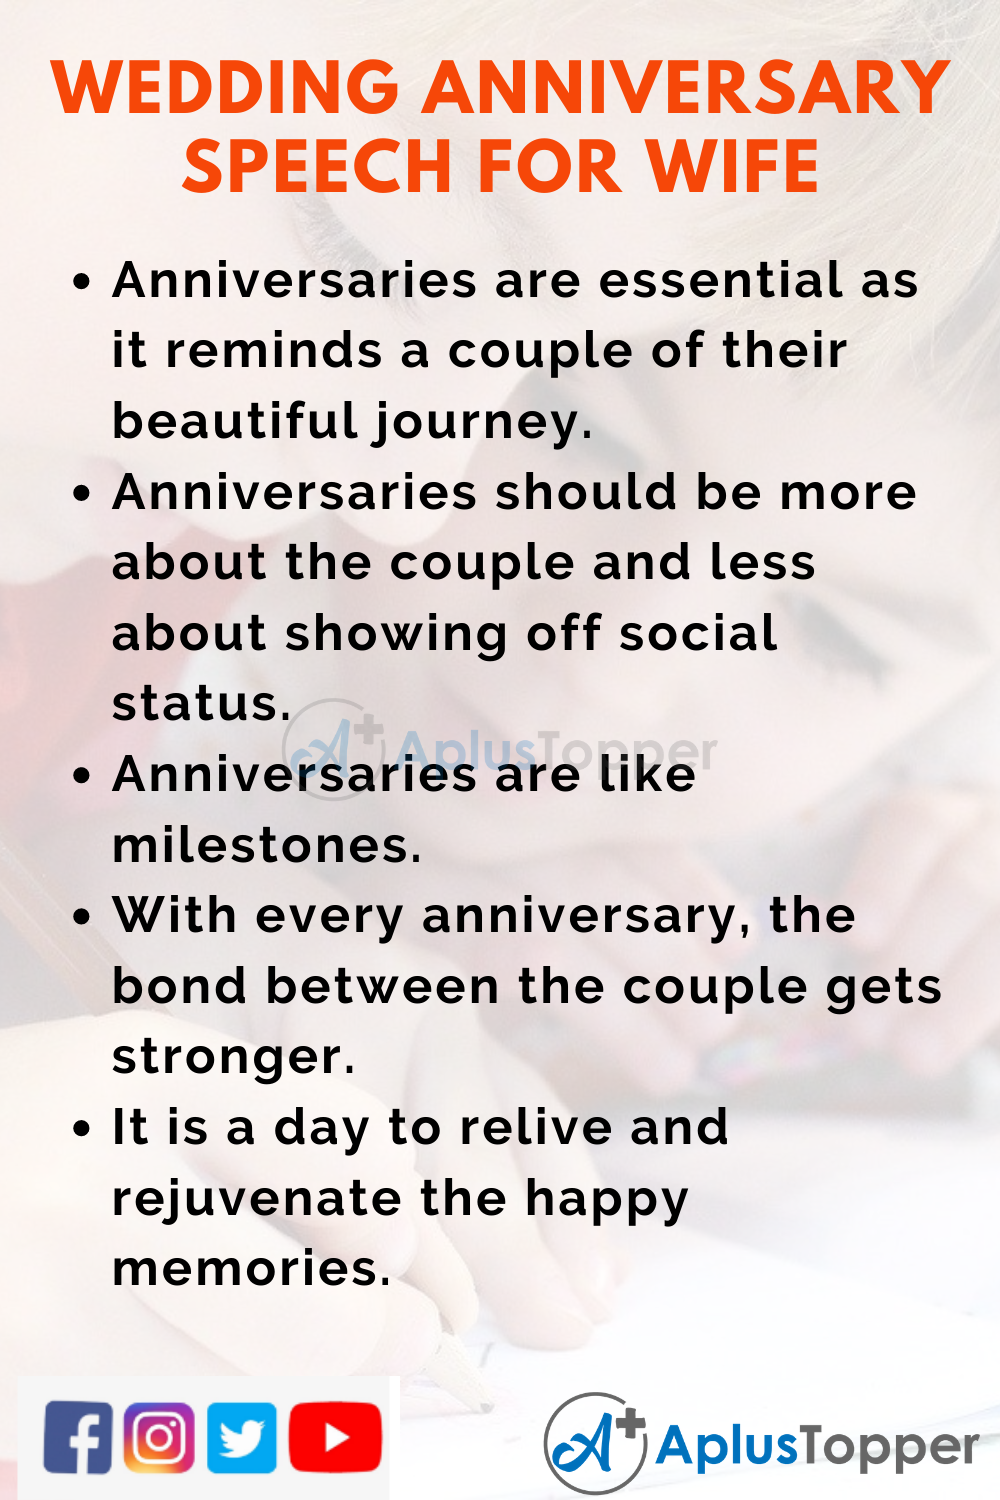 10 Lines On Wedding Anniversary Speech for Wife